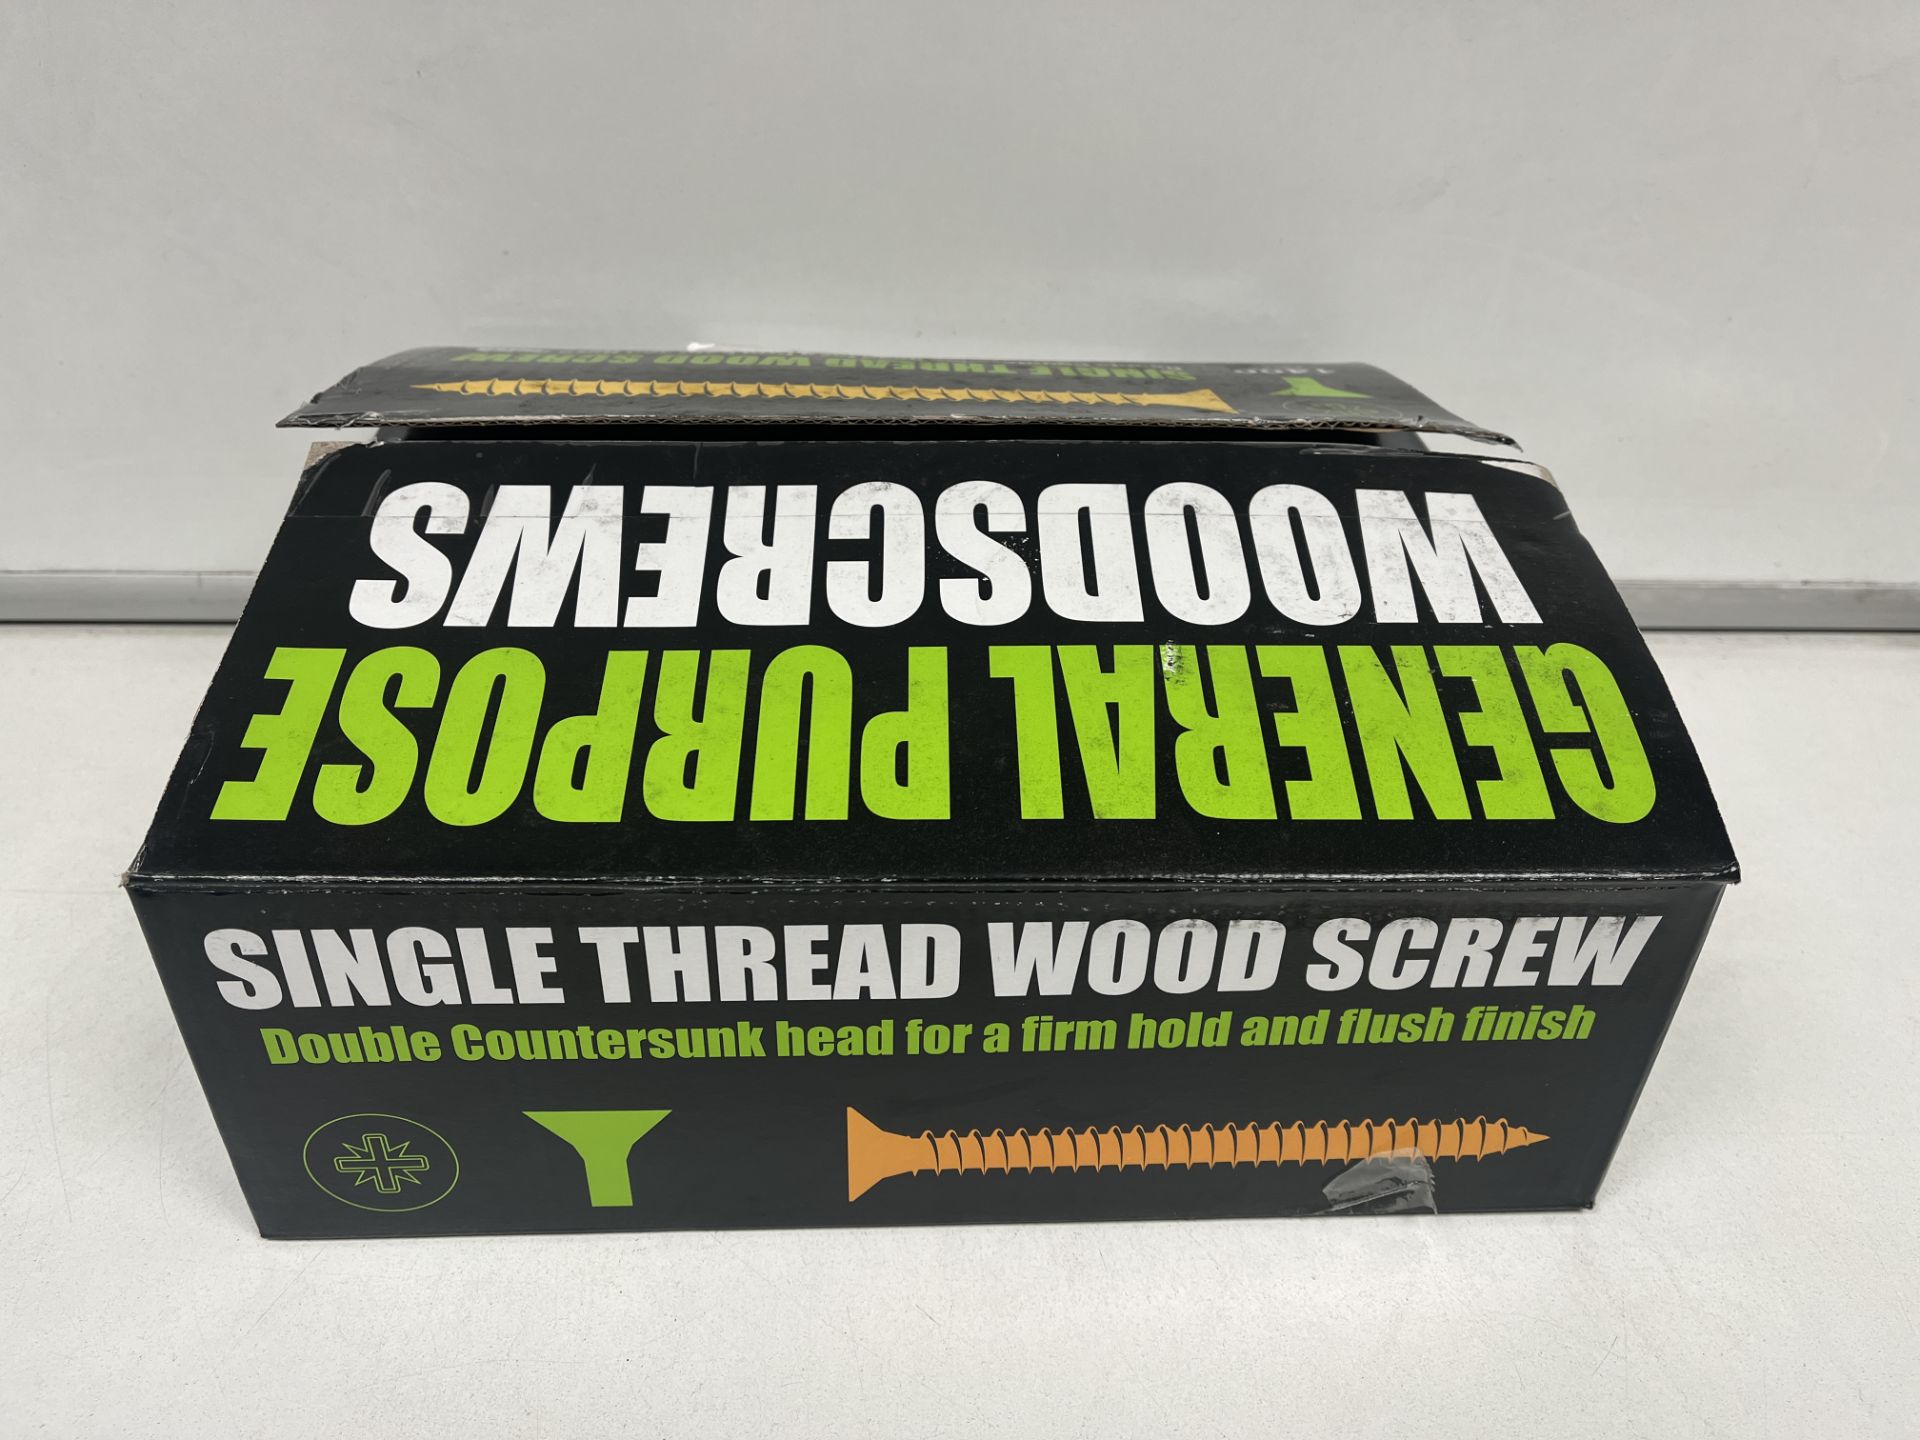 2 X NEW BOXES OF 1400 SINGLE THREAD GENERAL PURPOSE WOODSCREWS IN ASSORTED SIZES. DOUBLE COUNTERSUNK